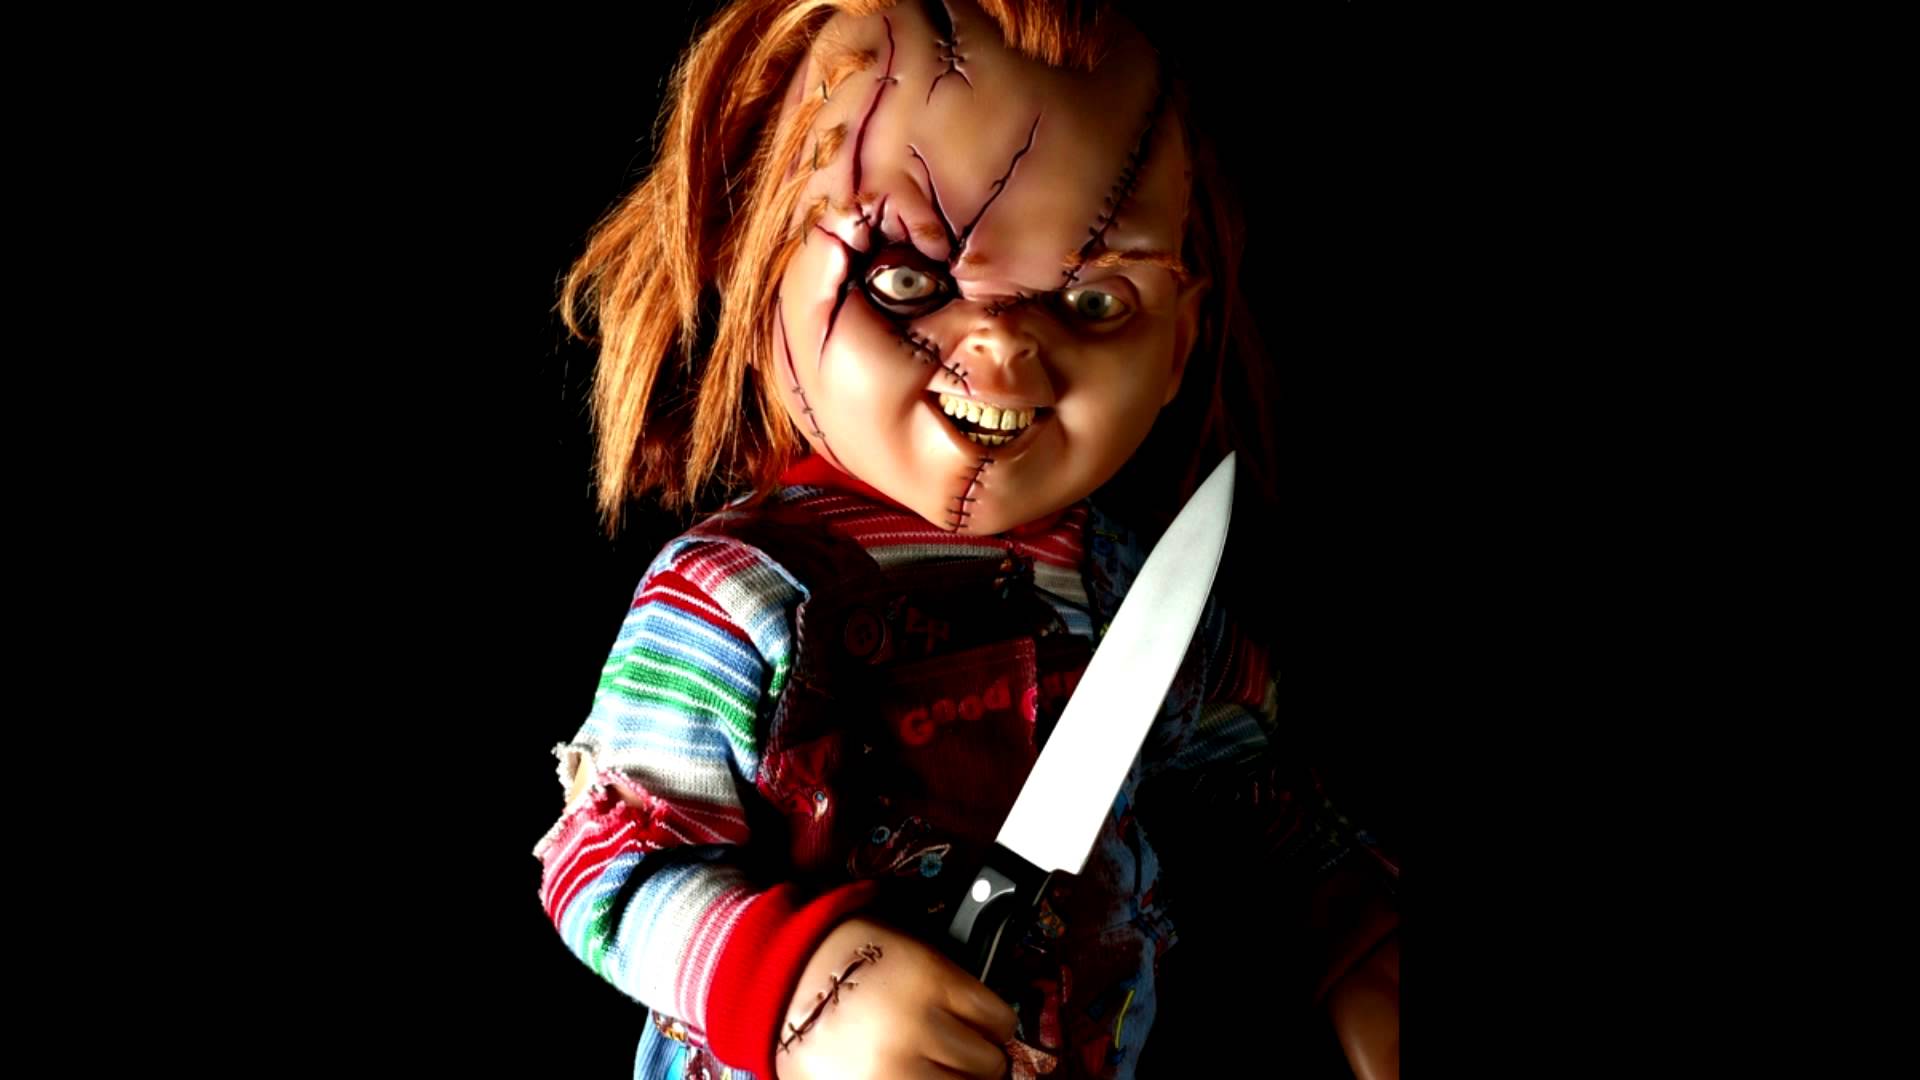 Child's Play TV series in the works from Don Mancini and David